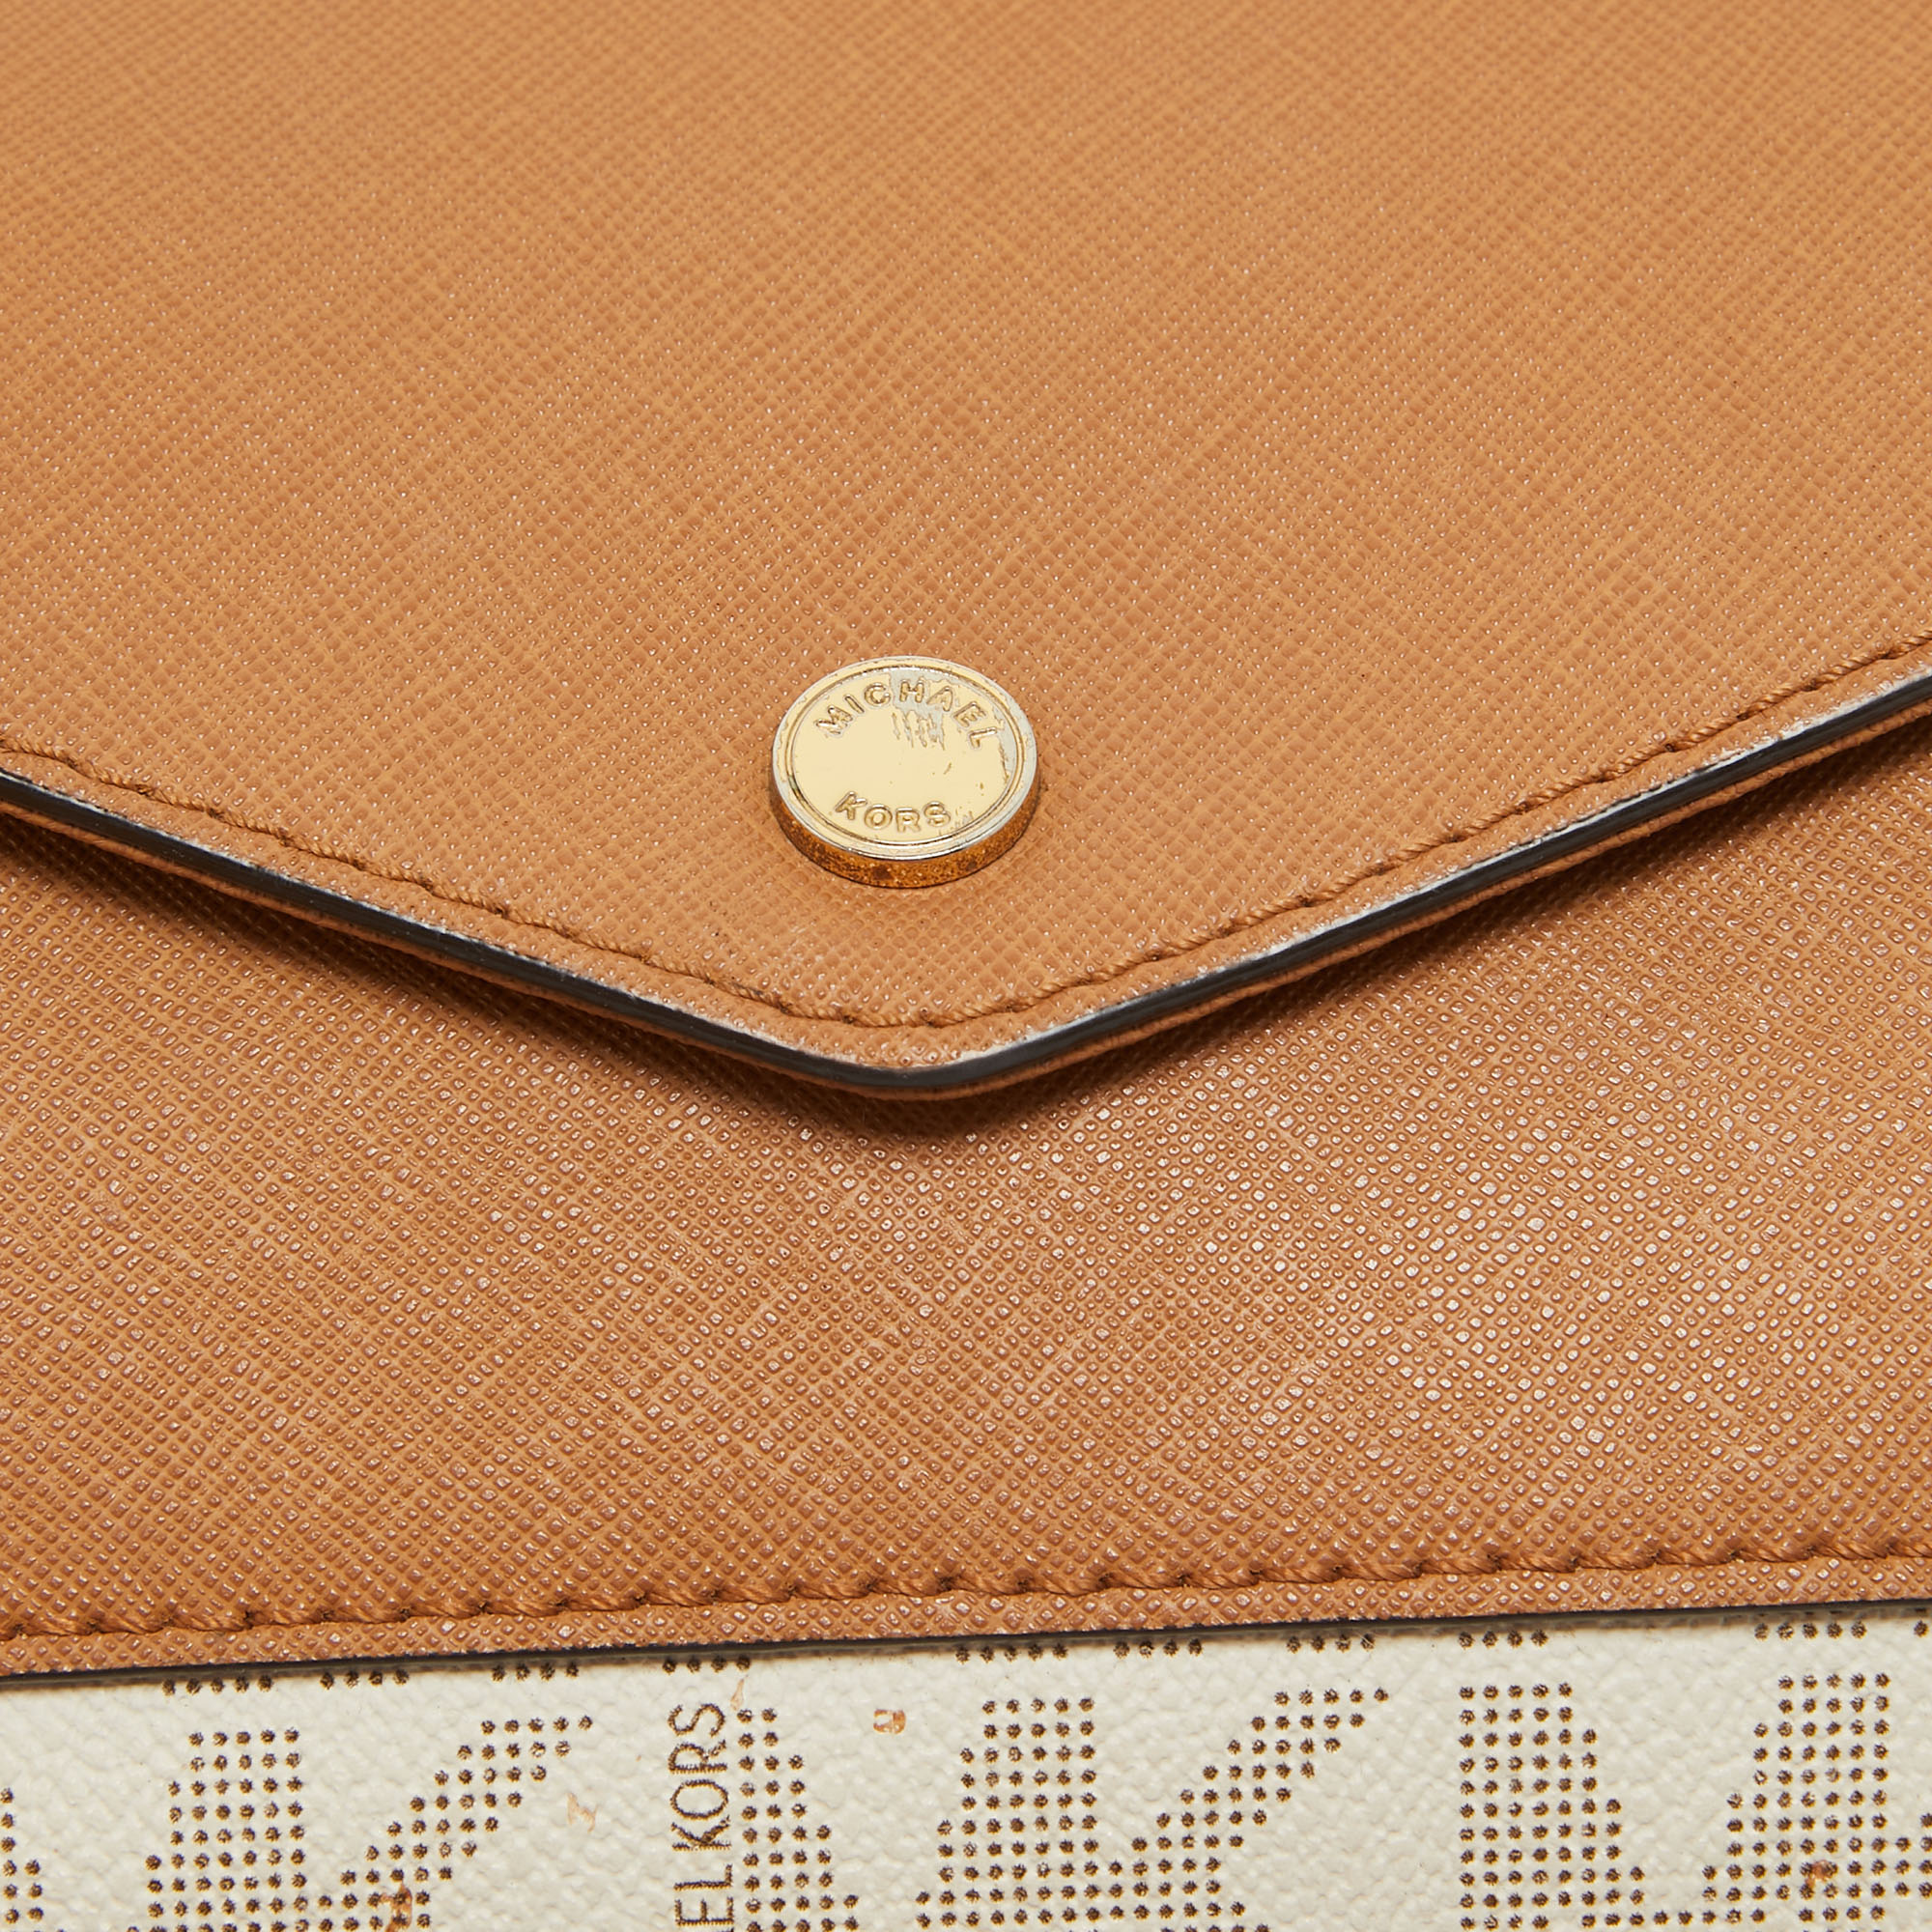 MICHAEL Michael Kors Beige/Brown Signature Coated Canvas And Leather Greenwhich Shoulder Bag